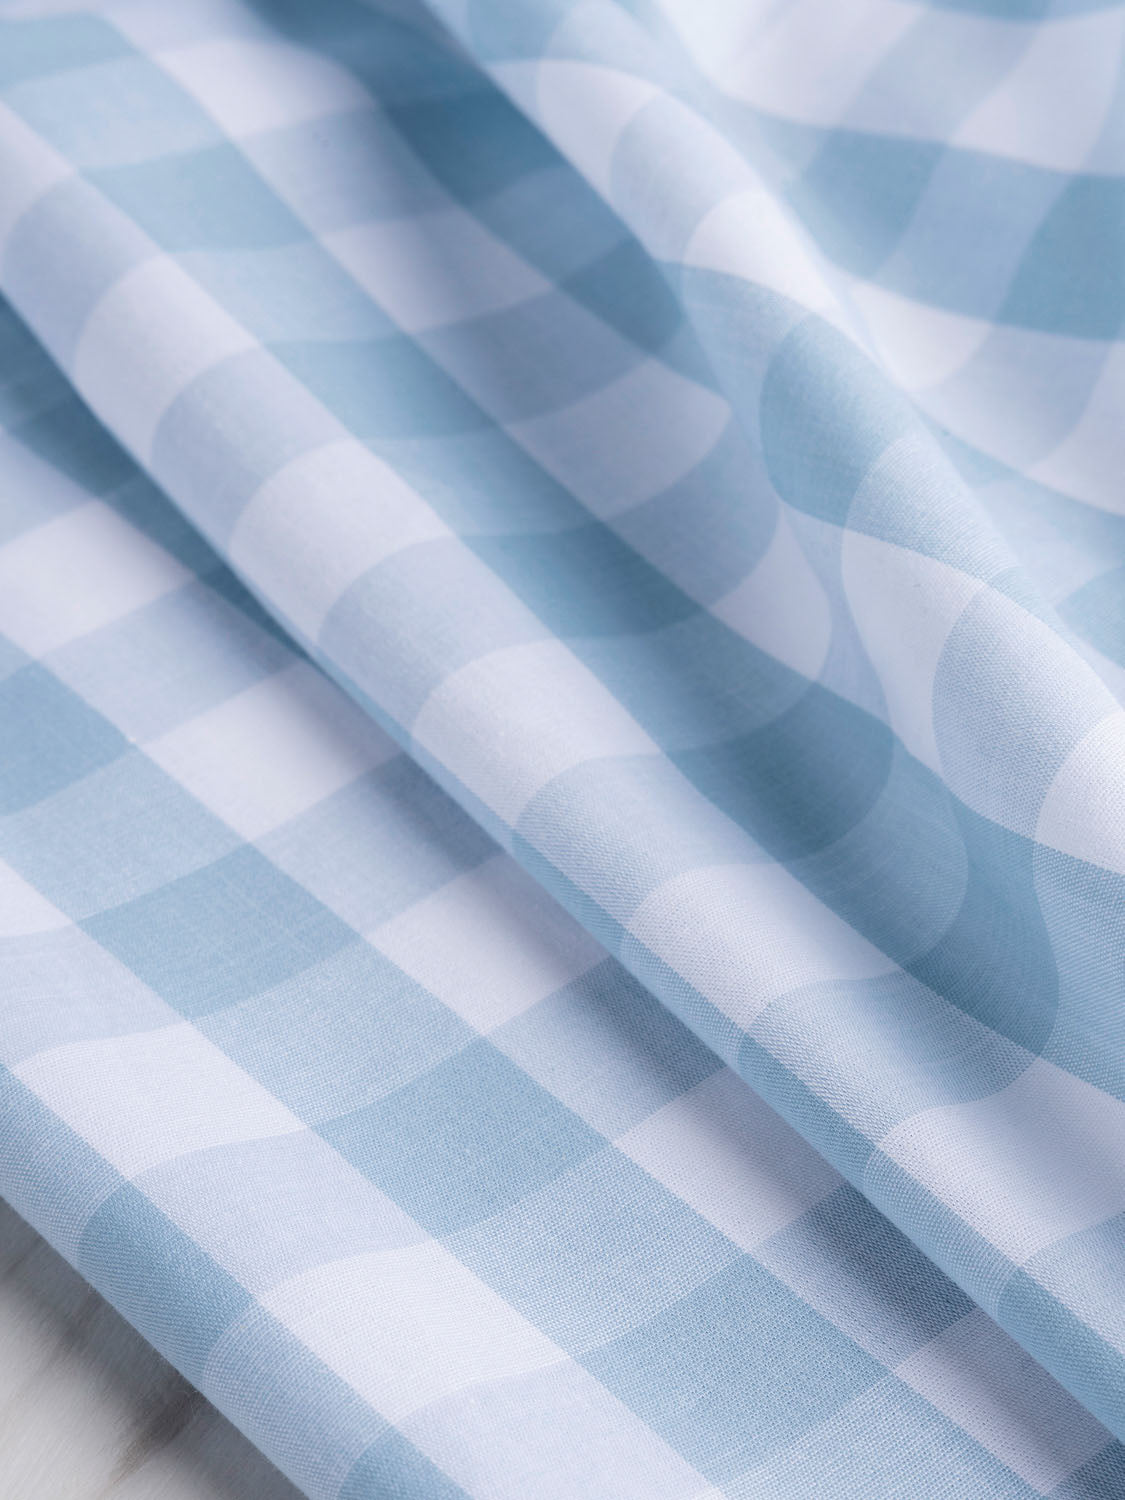 Large Scale Yarn-Dyed Gingham Cotton - River Blue + White | Core Fabrics